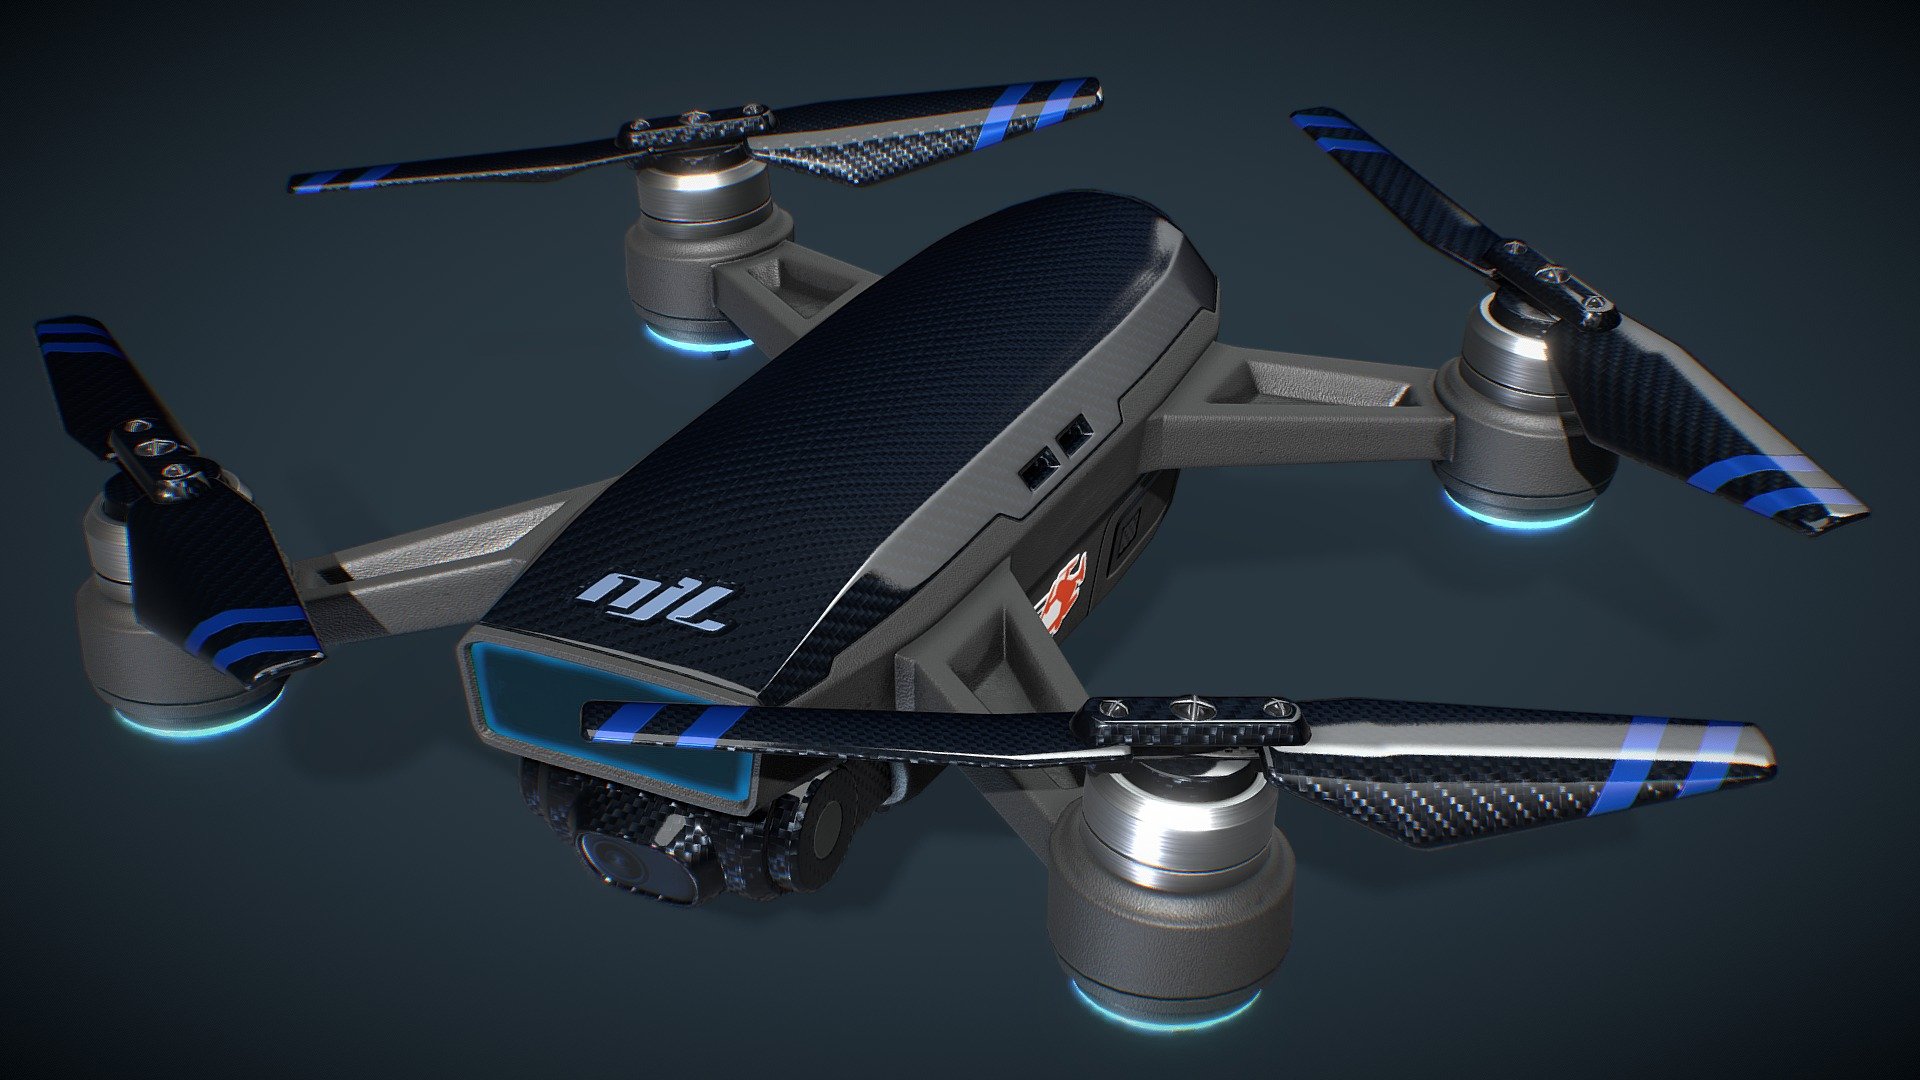 This Carbon Fiber Drone - UAV 3D model is ready to use for Virtual Reality (VR), Augmented Reality (AR), games and other real-time apps. The flight of UAVs may operate with various degrees of autonomy: either under remote control by a human operator or autonomously by onboard computers. Some time it is also used for surveillance purpose. This model has been created with PBR workflow. This is an AAA game model. 




Tries: 12940

Texture: 4K PBR Metalic Workflow (With clear coat texture)
 - Carbon Fiber Drone - Unmanned Aerial Vehicle - Buy Royalty Free 3D model by GameAnax 3d model